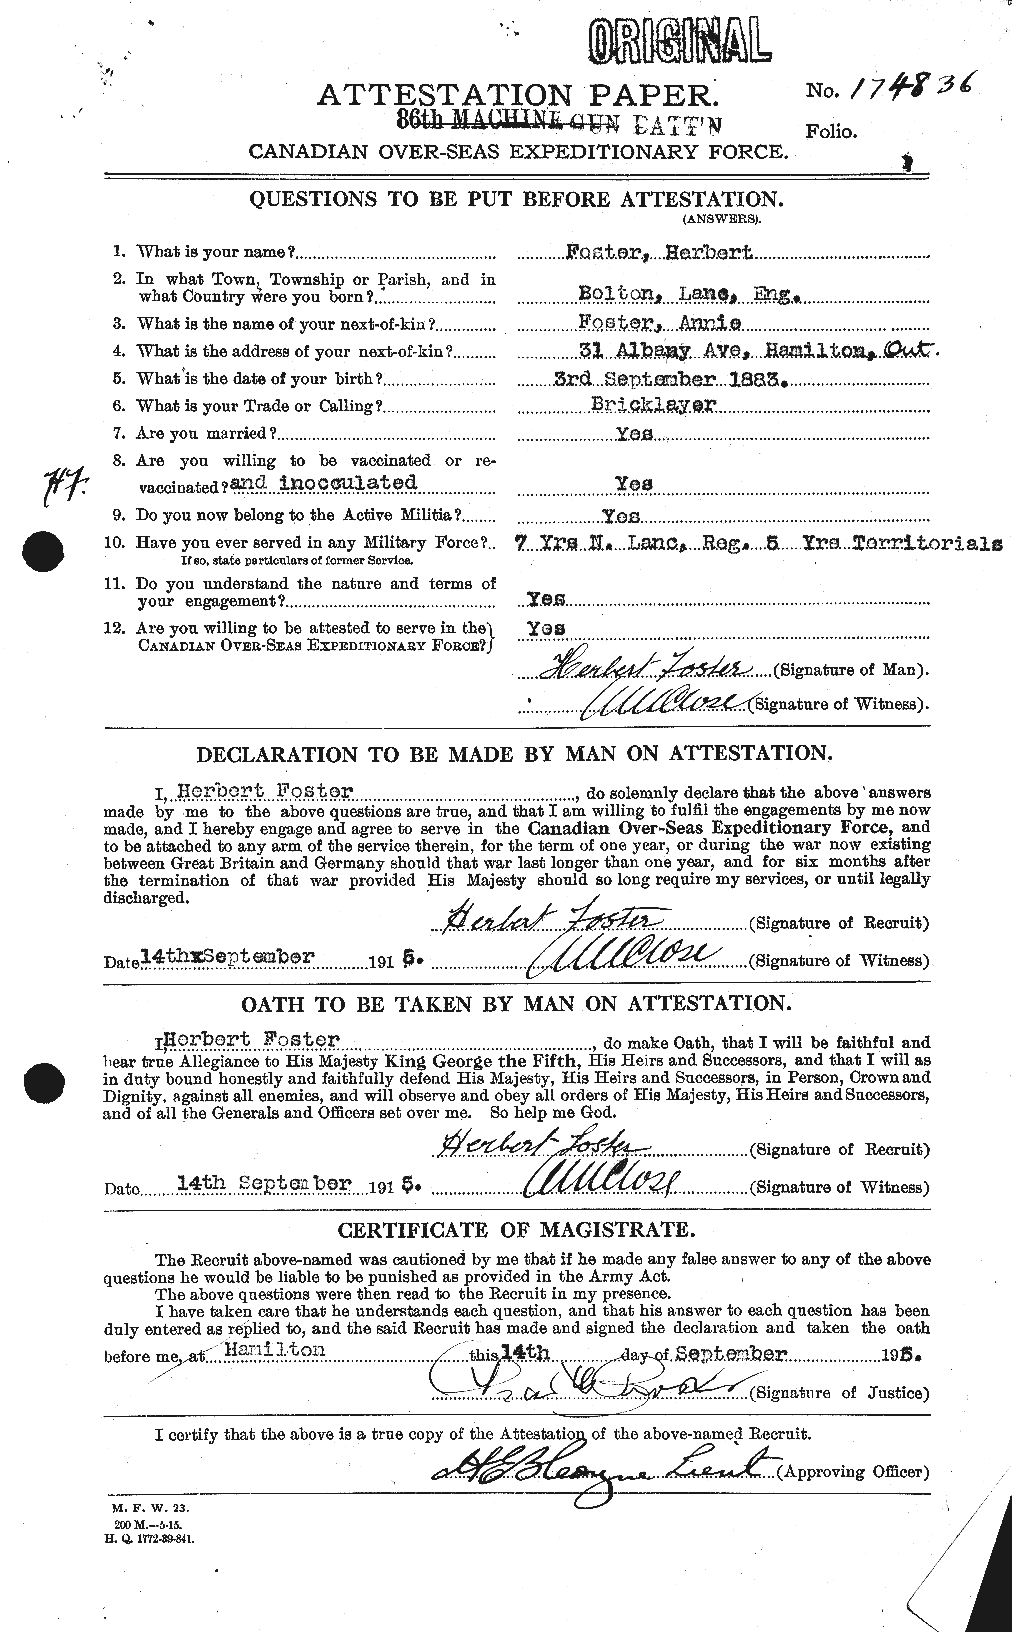 Personnel Records of the First World War - CEF 333252a